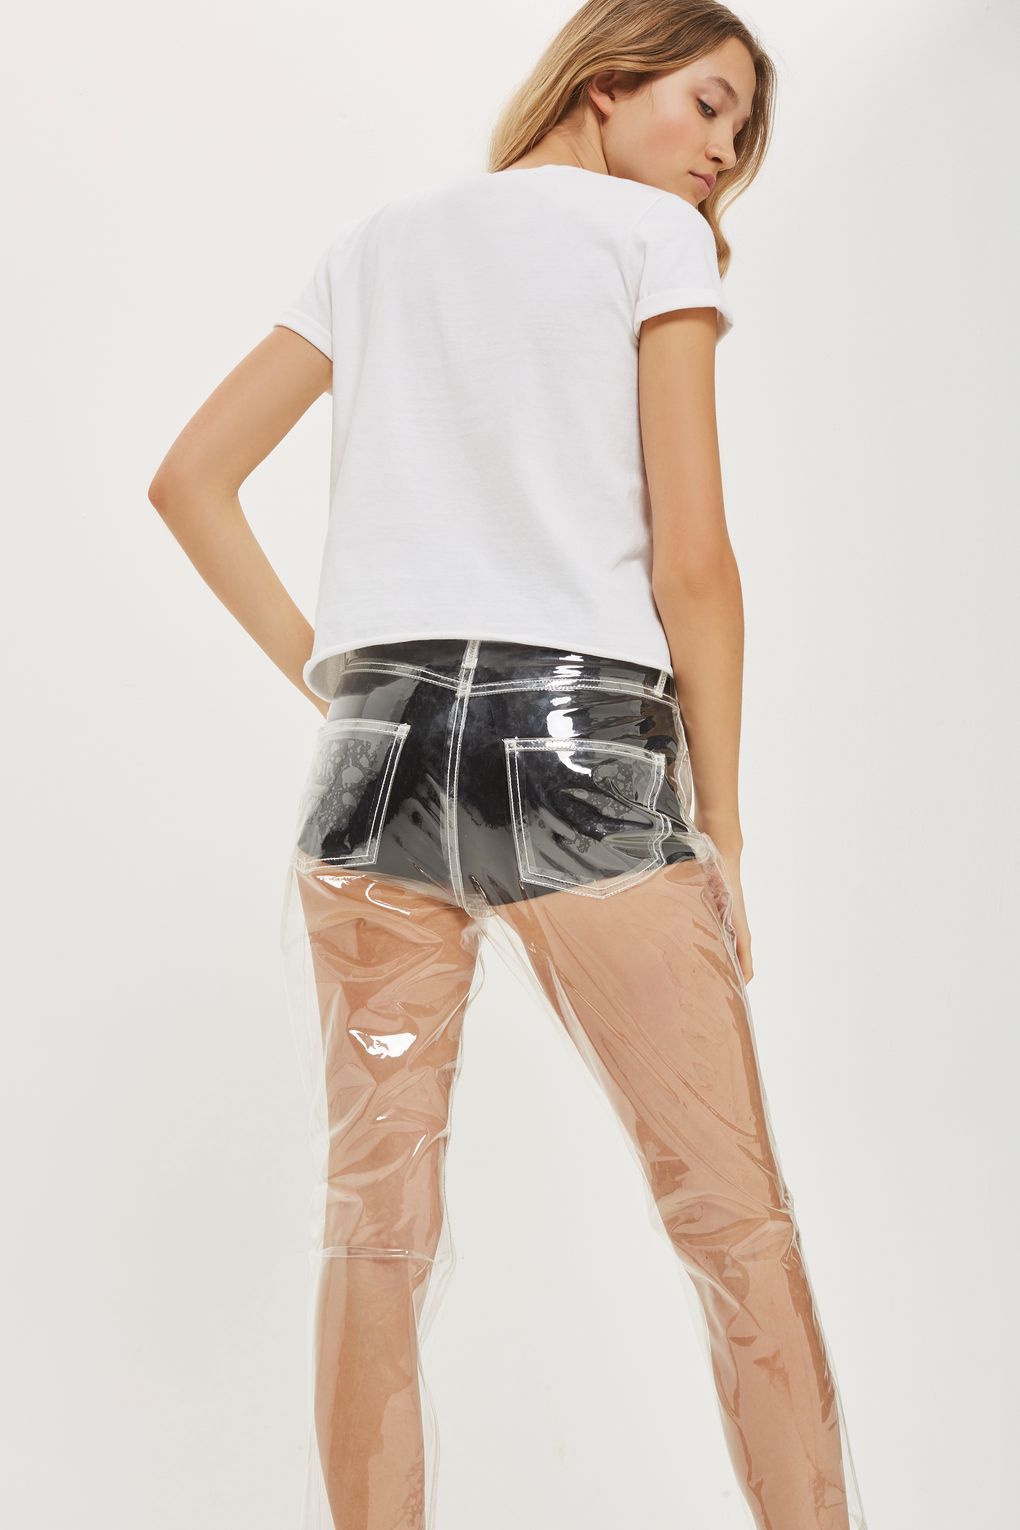 Topshop Is Selling See-Through Plastic and Honestly Why?